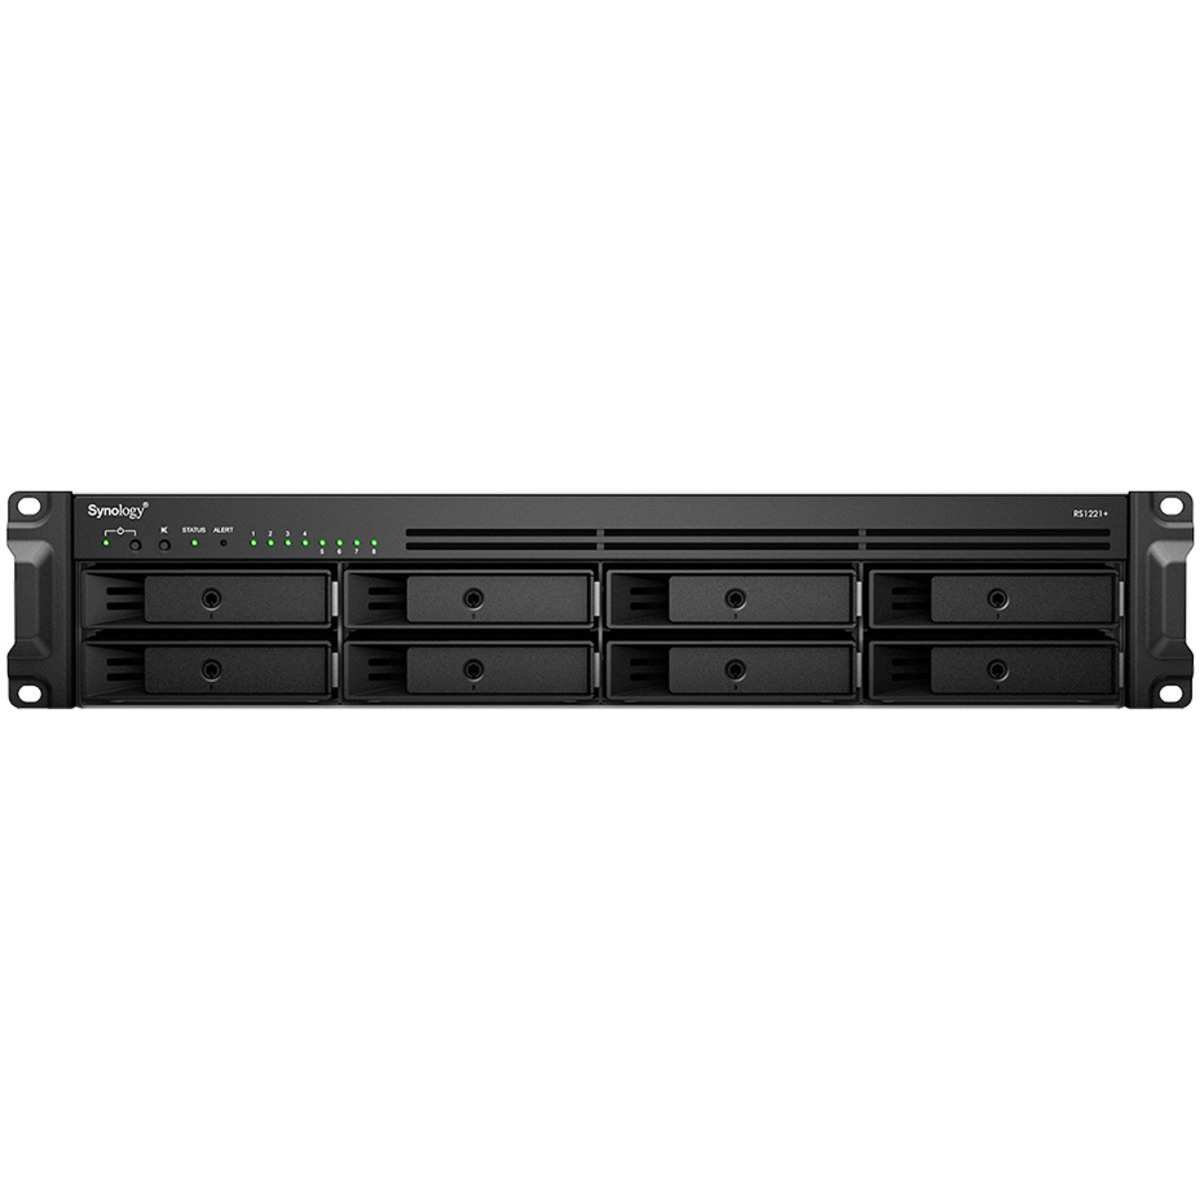 Synology RackStation RS1221RP+ 64tb 8-Bay RackMount Multimedia / Power User / Business NAS - Network Attached Storage Device 4x16tb Synology HAT5300 Series HAT5300-16T 3.5 7200rpm SATA 6Gb/s HDD ENTERPRISE Class Drives Installed - Burn-In Tested - FREE RAM UPGRADE RackStation RS1221RP+